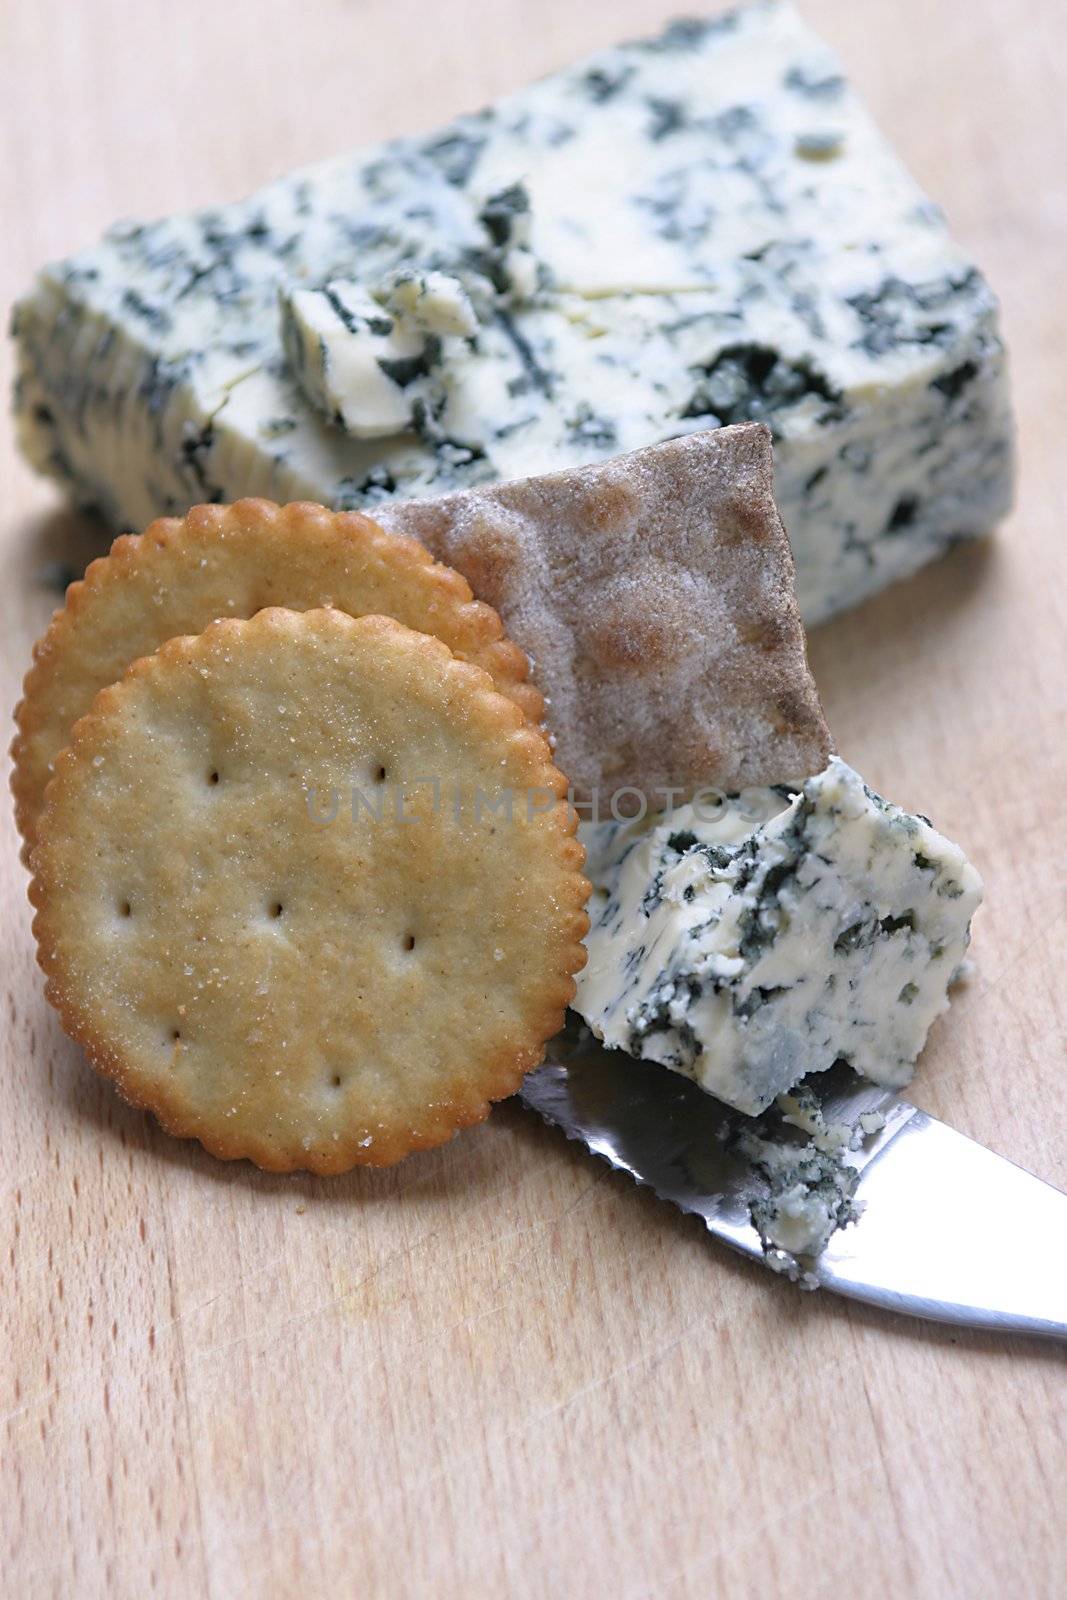 Blue cheese and crackers by litleskare